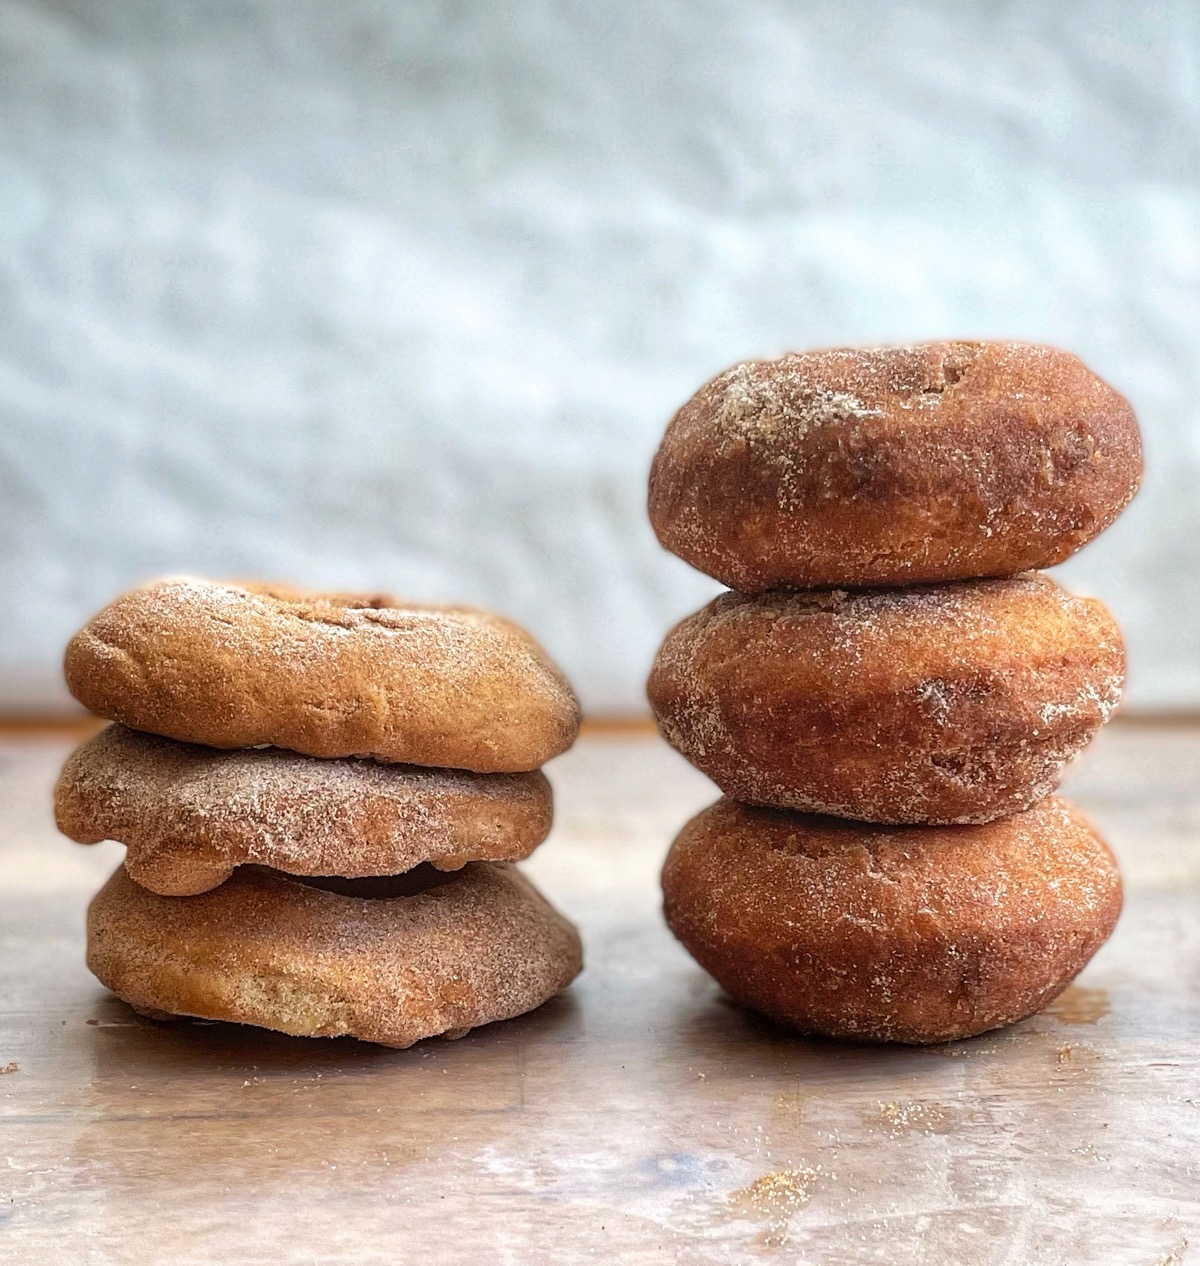 Stack of three doughnuts fried in hot oil next to a stack of three doughnuts cooked in an air fryer, showing how much less the air fryer doughnuts expand.